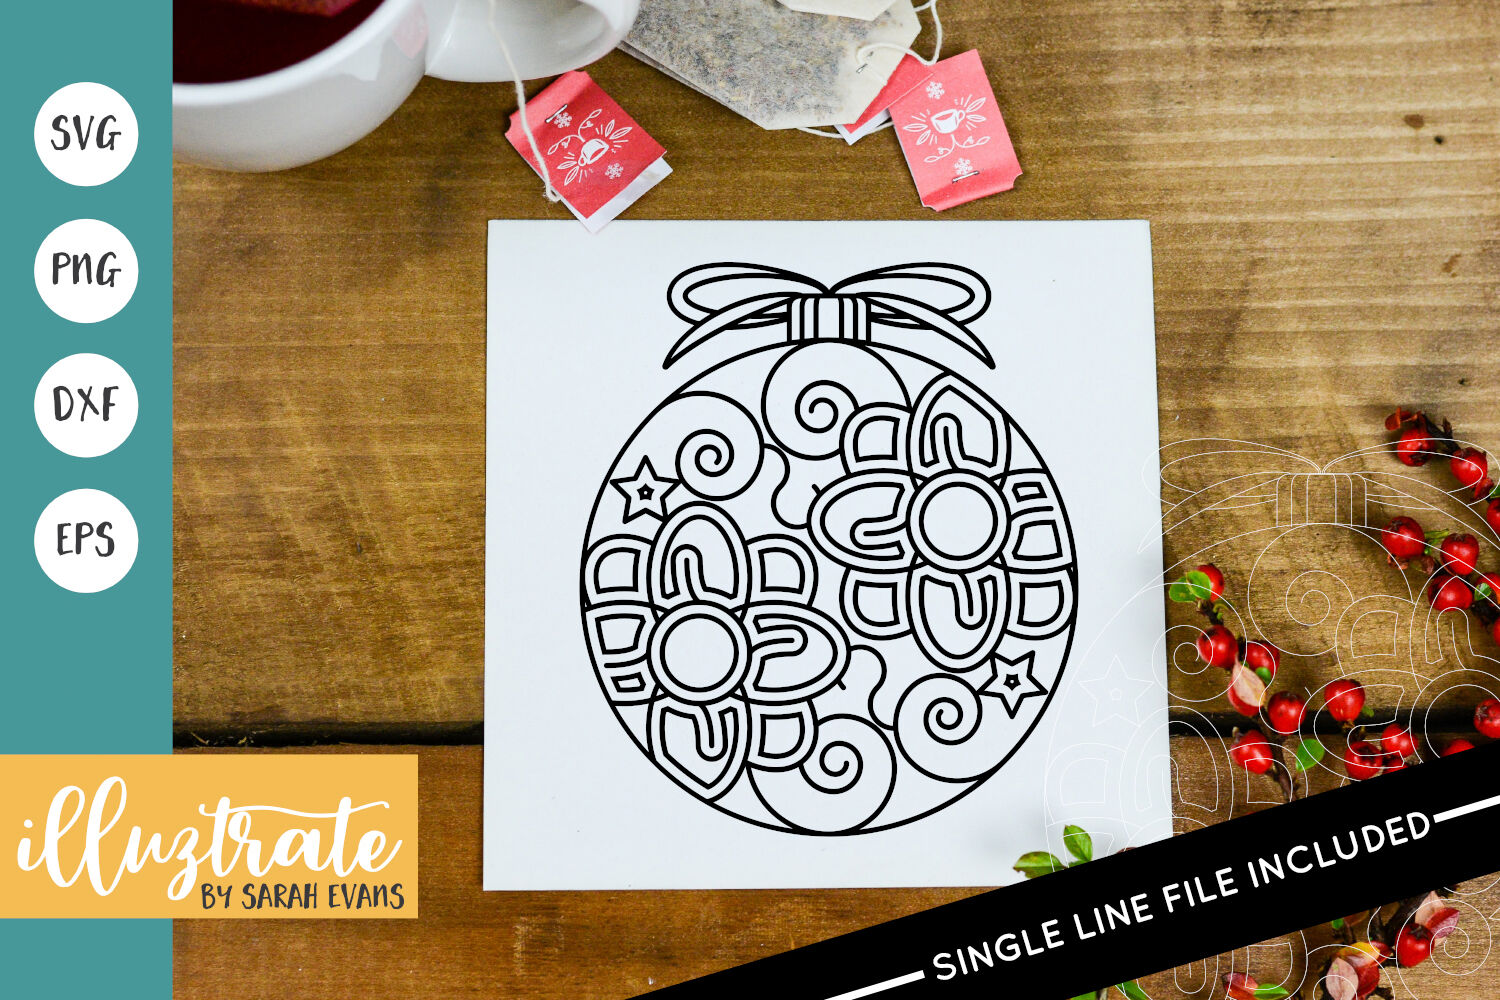 Download Christmas Bauble Mandala Svg Christmas Bauble Foil Quill Festive By Picpixpic Thehungryjpeg Com